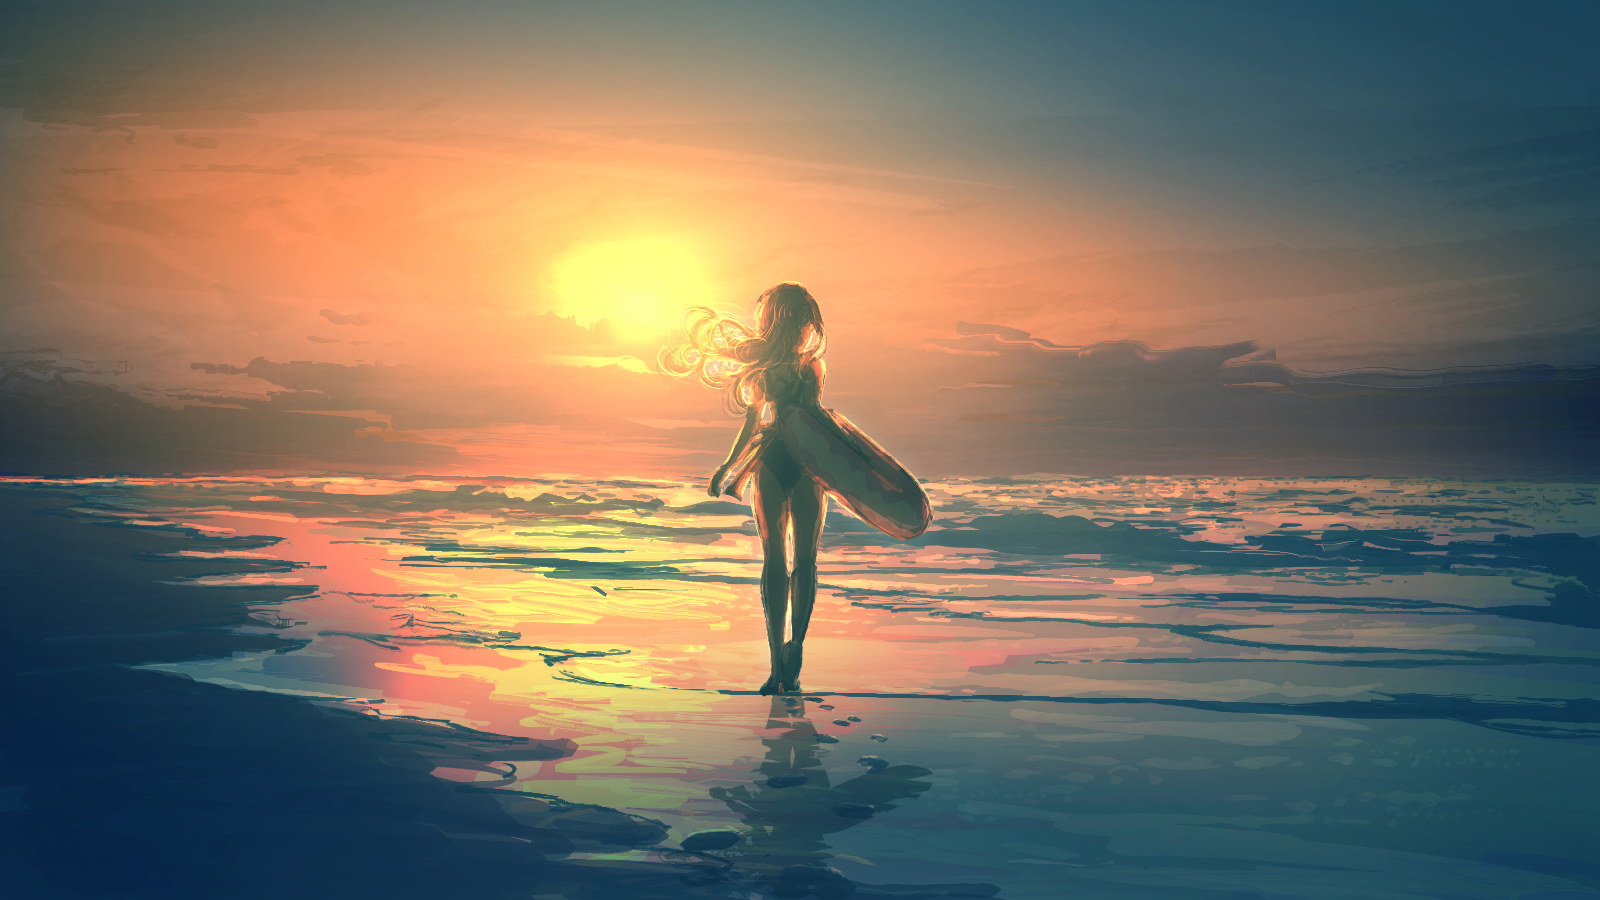 5,118 Anime Sunset Images, Stock Photos & Vectors | Shutterstock